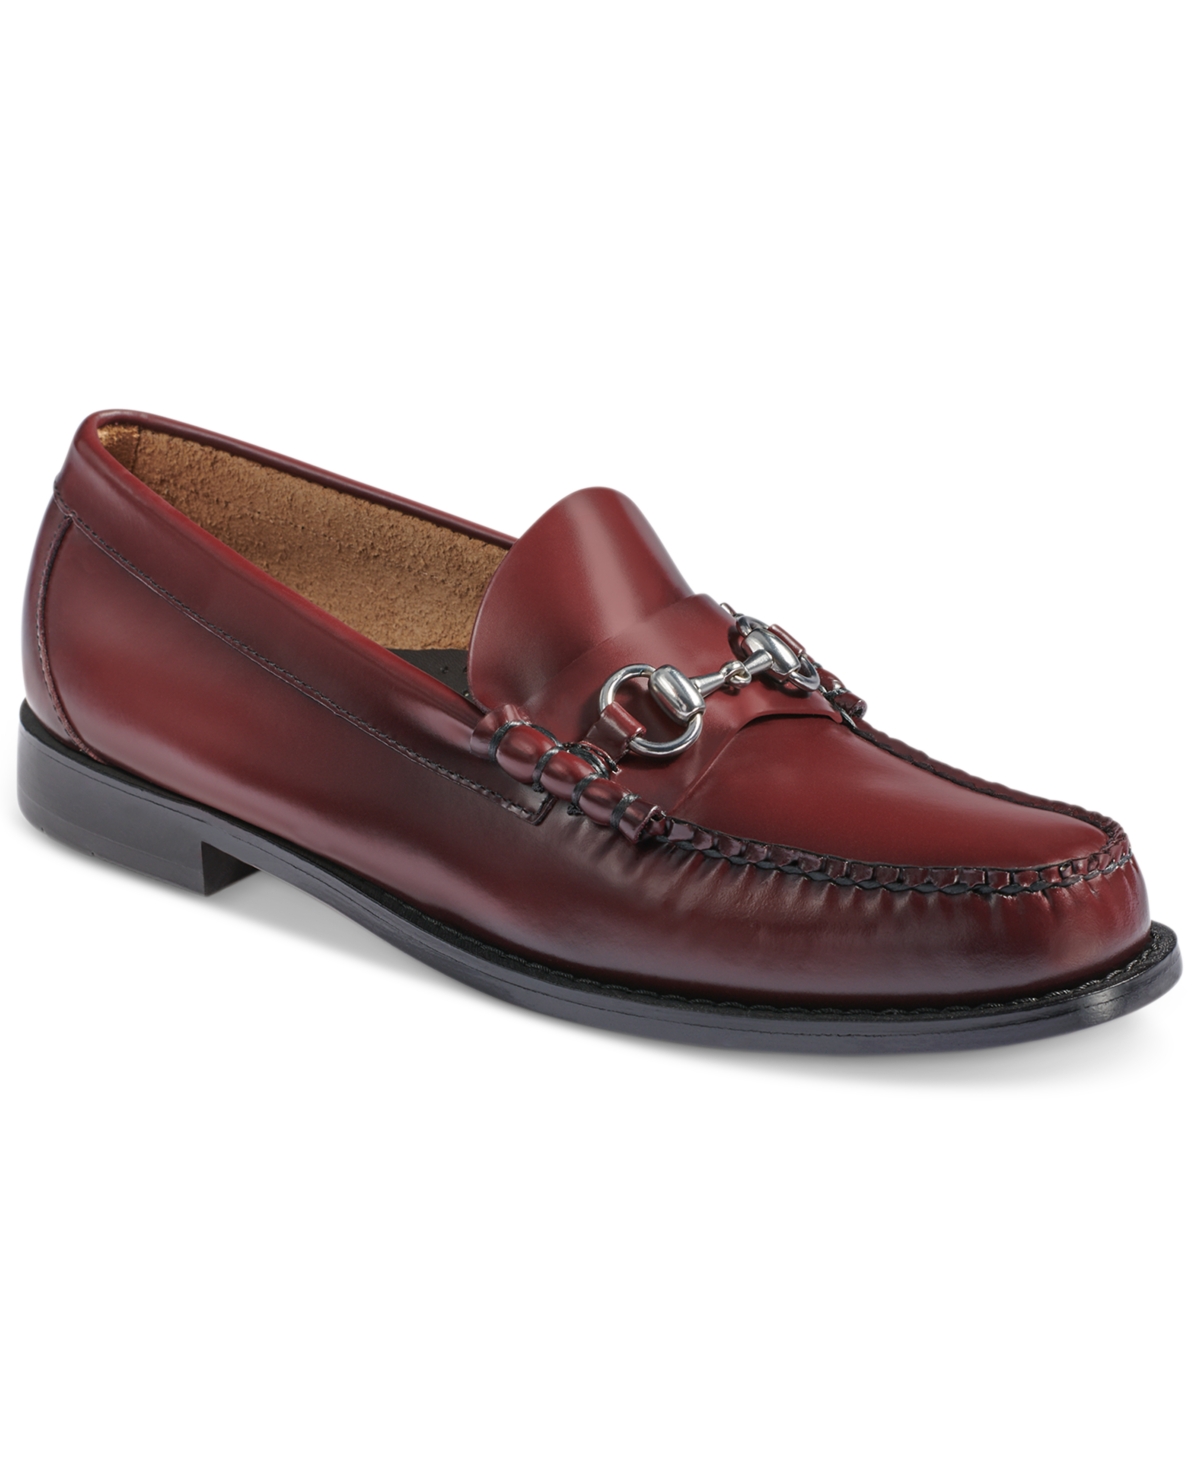 G.h.bass Men's Lincoln Leather Penny Loafers - Wine